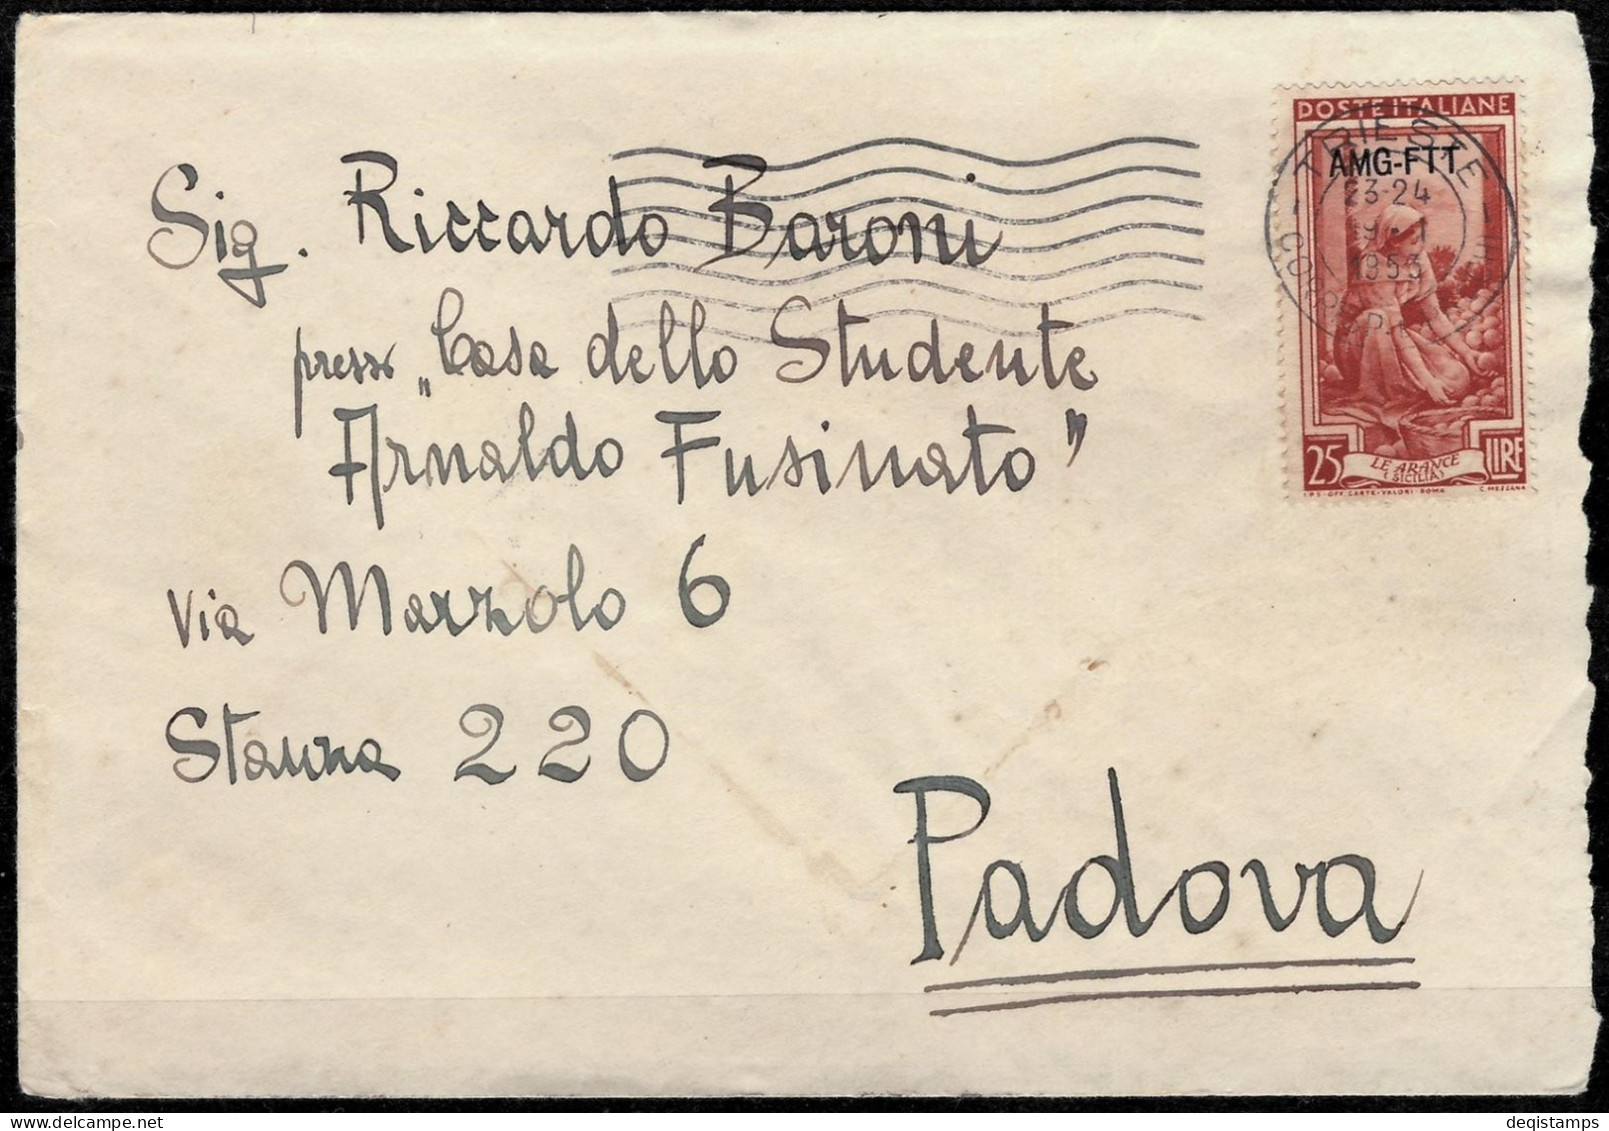 Italy / Trieste A Year 1953  AMG - FTT  Cover - Jugoslawische Bes.: Triest